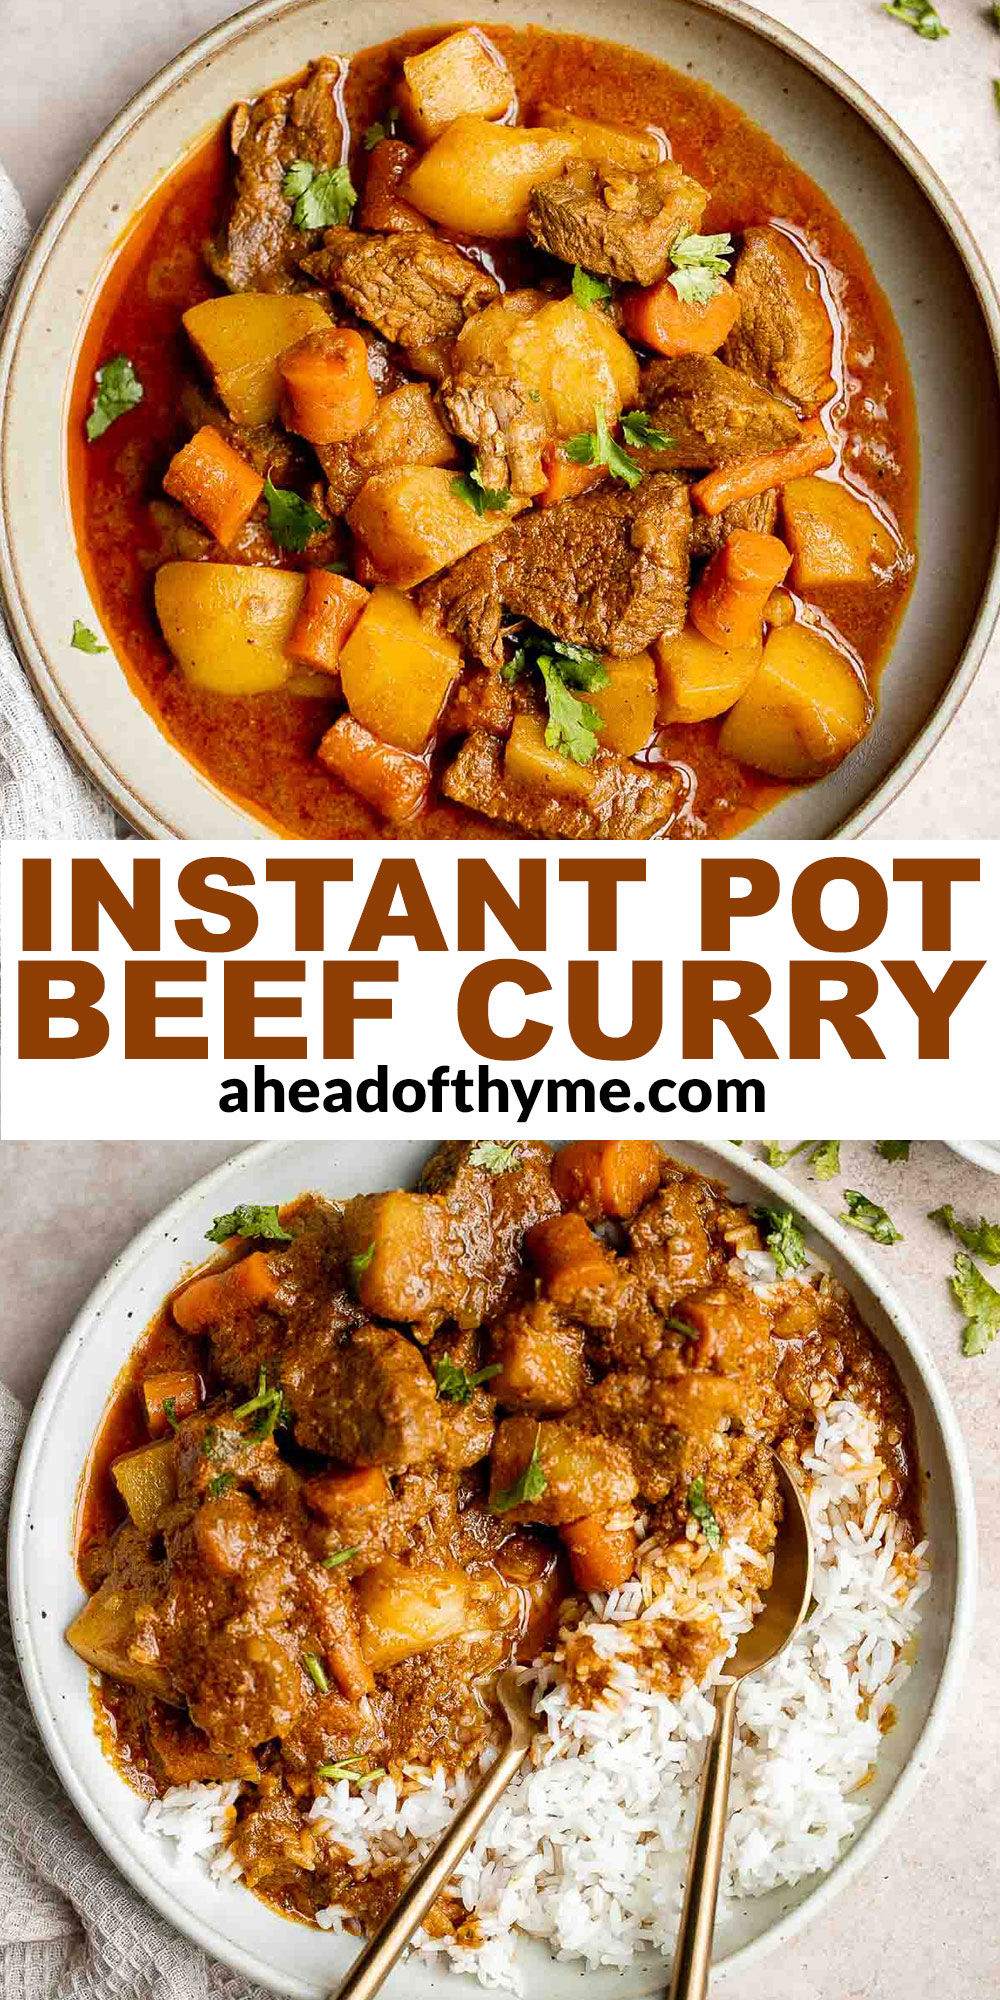 Instant Pot Beef Curry